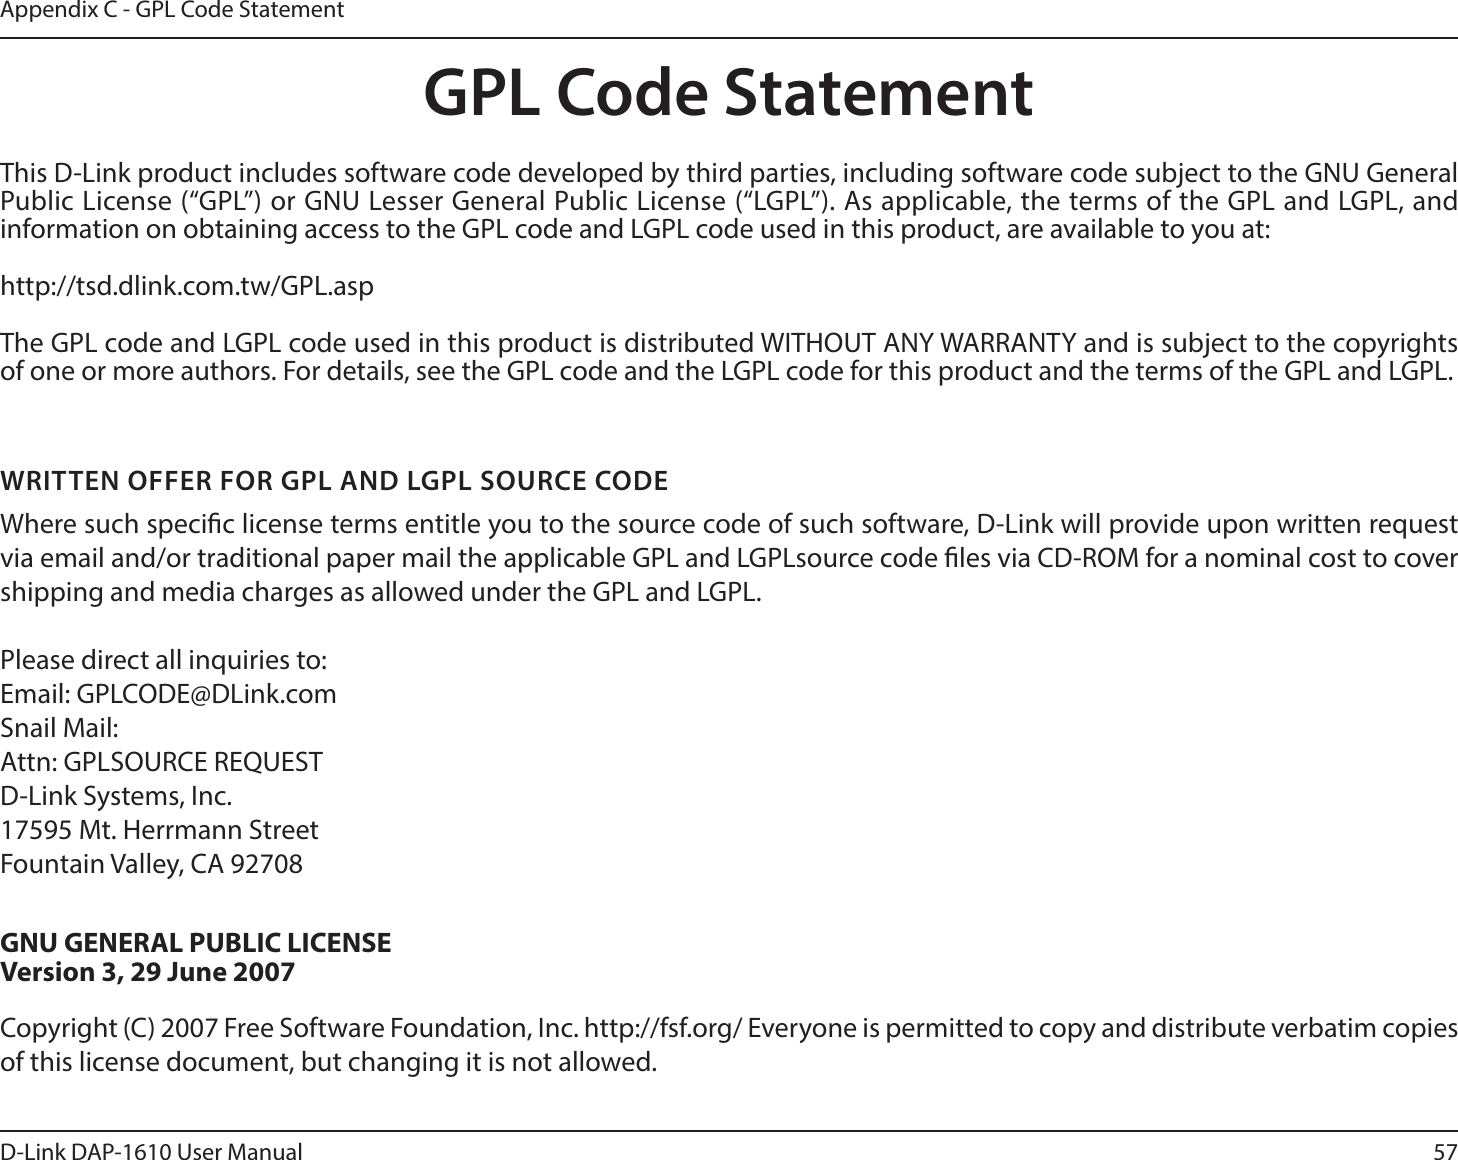 57D-Link DAP-1610 User ManualAppendix C - GPL Code StatementGPL Code StatementThis D-Link product includes software code developed by third parties, including software code subject to the GNU General Public License (“GPL”) or GNU Lesser General Public License (“LGPL”). As applicable, the terms of the GPL and LGPL, and information on obtaining access to the GPL code and LGPL code used in this product, are available to you at:http://tsd.dlink.com.tw/GPL.aspThe GPL code and LGPL code used in this product is distributed WITHOUT ANY WARRANTY and is subject to the copyrights of one or more authors. For details, see the GPL code and the LGPL code for this product and the terms of the GPL and LGPL.WRITTEN OFFER FOR GPL AND LGPL SOURCE CODEWhere such specic license terms entitle you to the source code of such software, D-Link will provide upon written request via email and/or traditional paper mail the applicable GPL and LGPLsource code les via CD-ROM for a nominal cost to cover shipping and media charges as allowed under the GPL and LGPL. Please direct all inquiries to:Email: GPLCODE@DLink.comSnail Mail:Attn: GPLSOURCE REQUESTD-Link Systems, Inc.17595 Mt. Herrmann StreetFountain Valley, CA 92708GNU GENERAL PUBLIC LICENSEVersion 3, 29 June 2007Copyright (C) 2007 Free Software Foundation, Inc. http://fsf.org/ Everyone is permitted to copy and distribute verbatim copies of this license document, but changing it is not allowed.